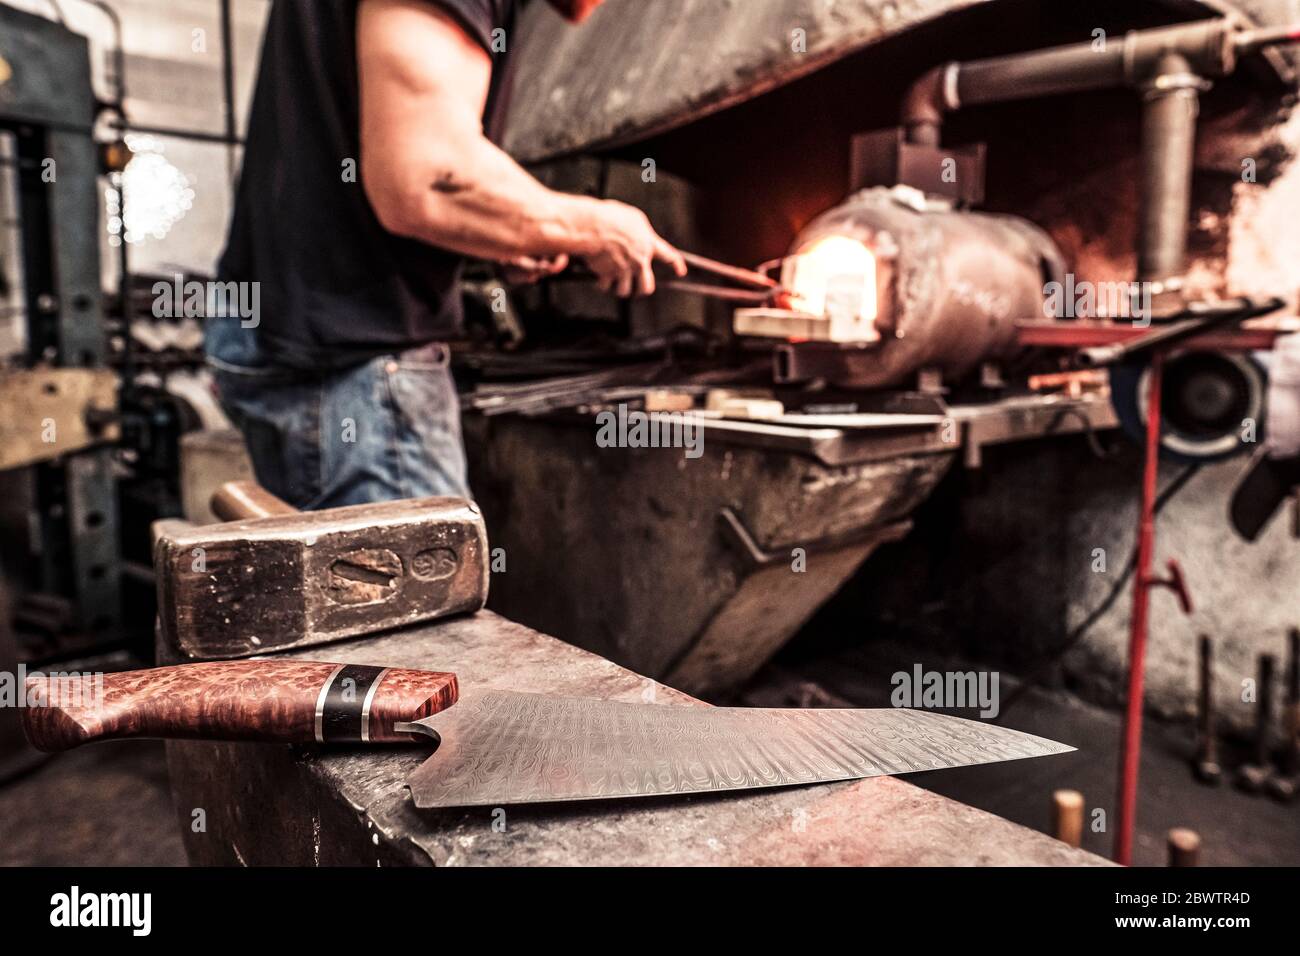 Knife maker working at melting furnace, finished knife on anvil in the foreground Stock Photo